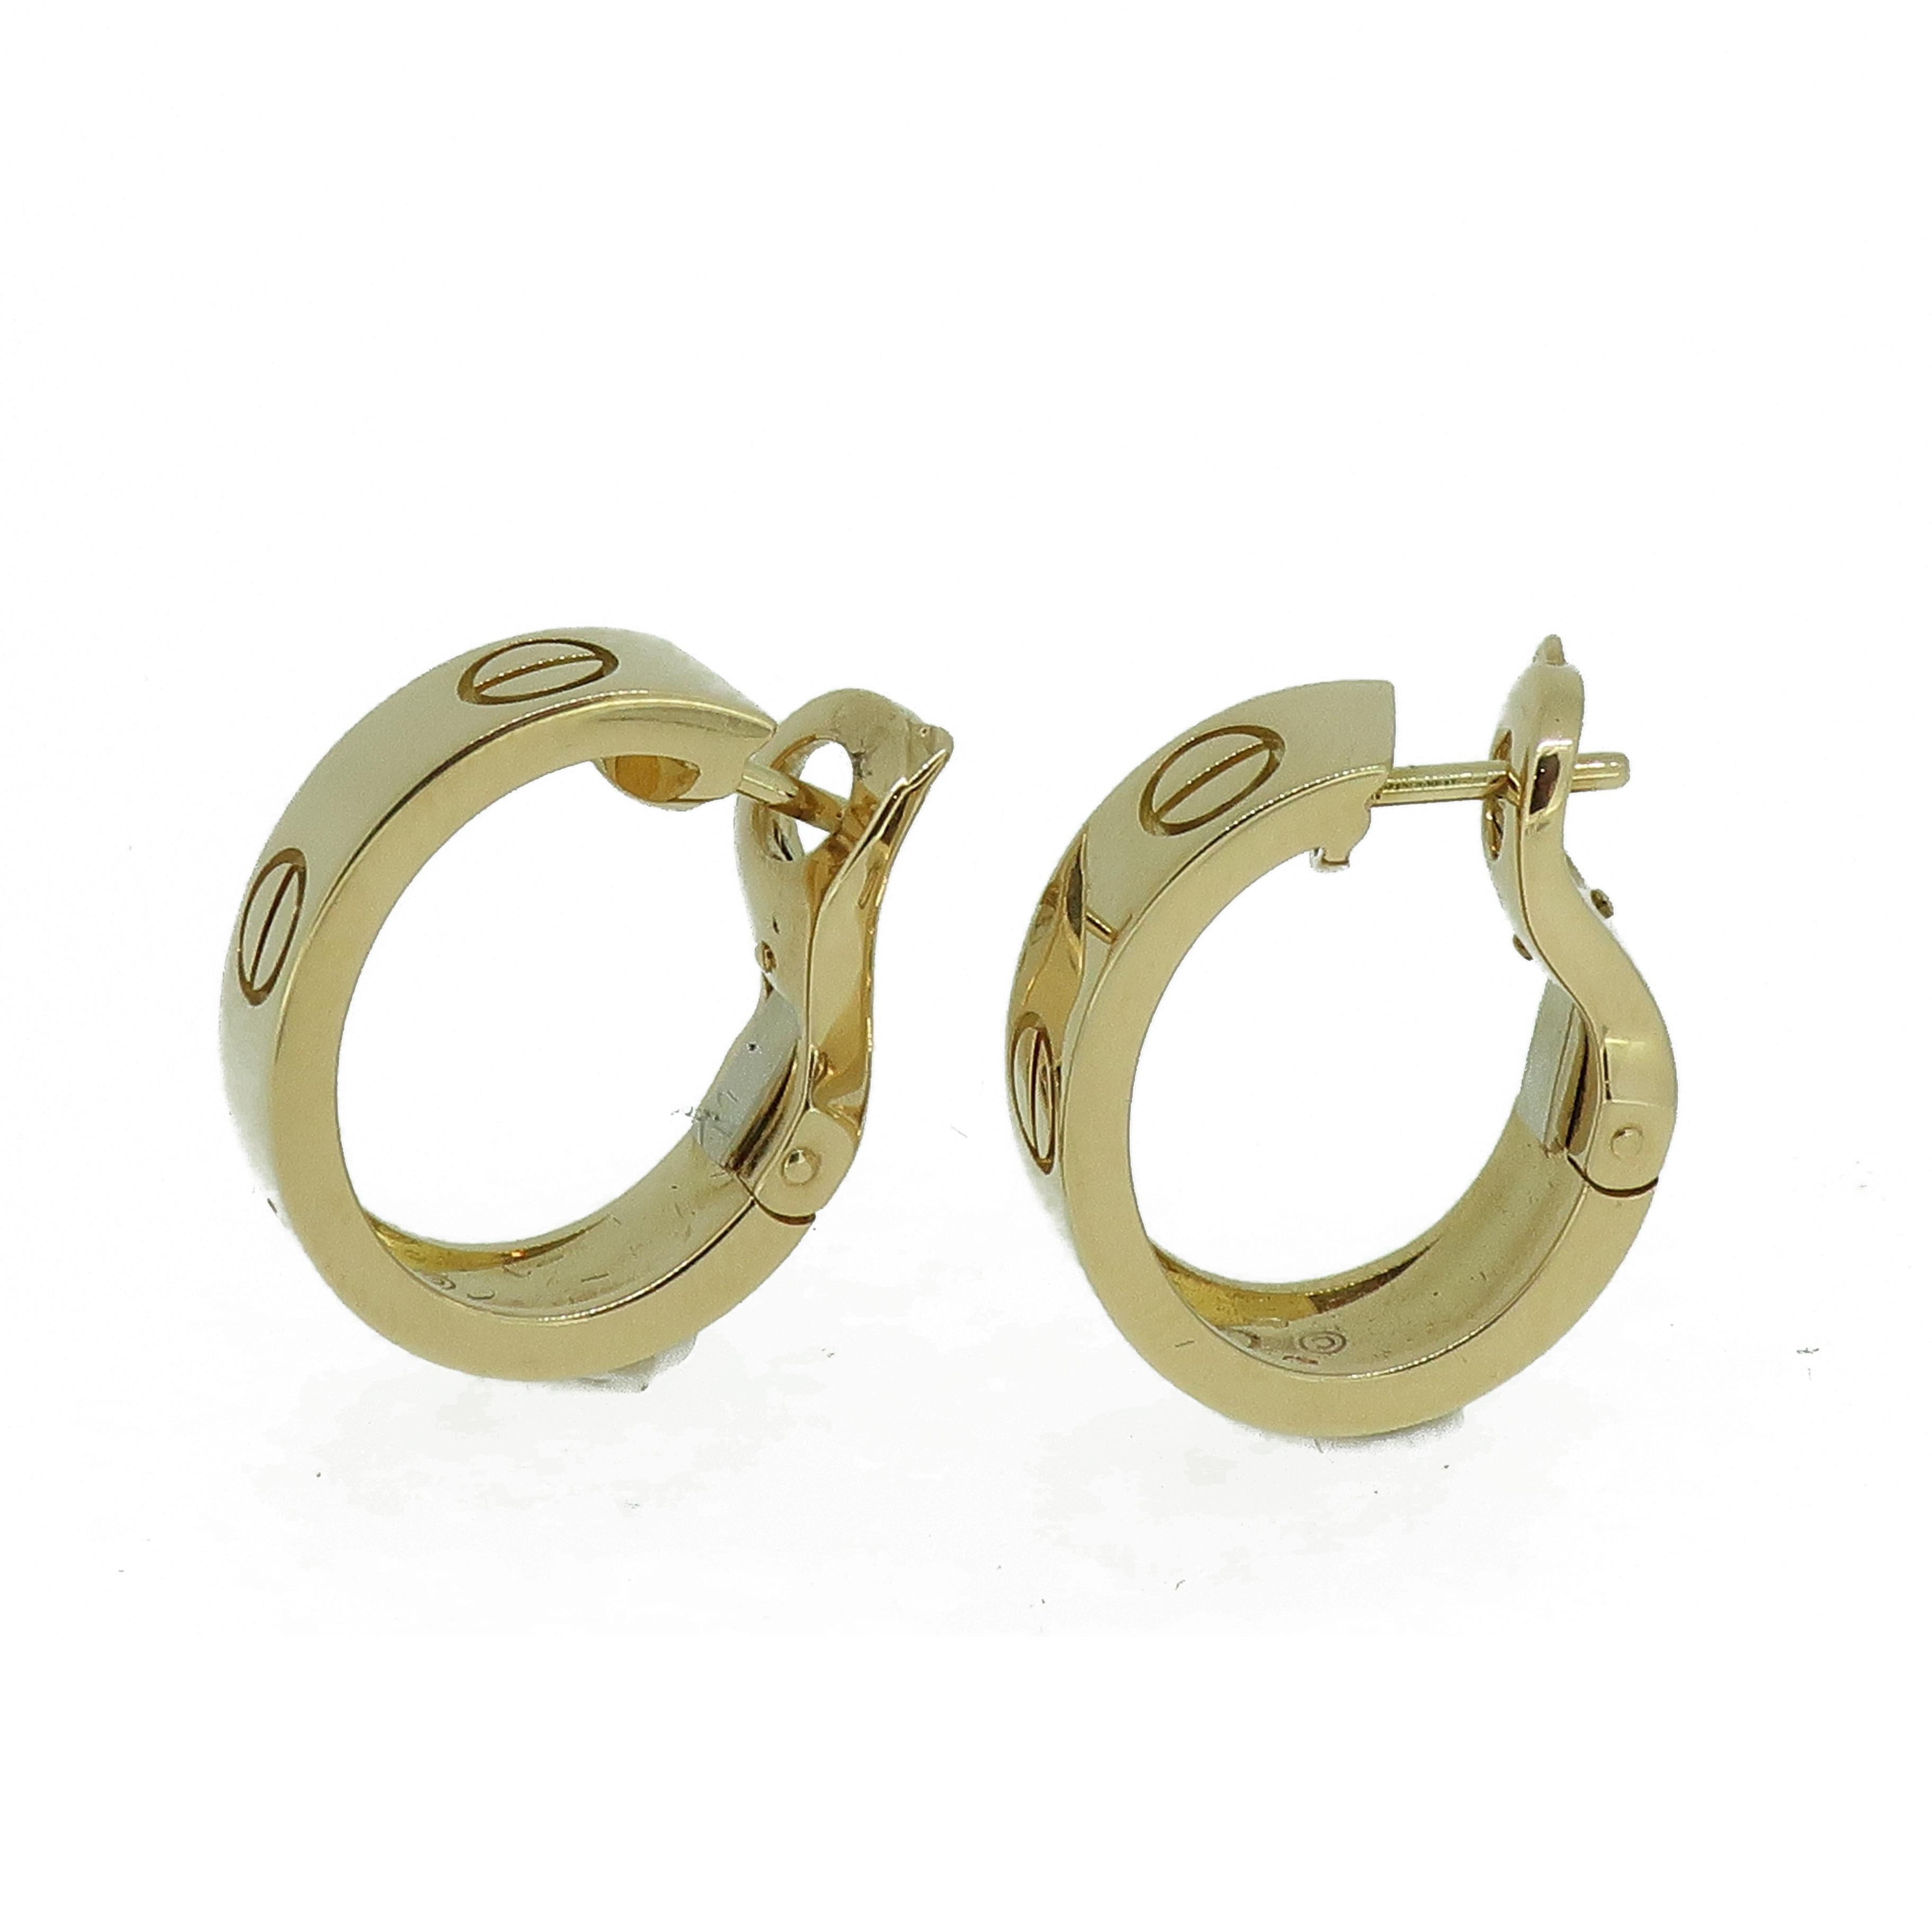 Gold Cartier 'Love' Hoop Earrings 18 Karat Yellow

Classic and stylish ]Cartier 'Love' earrings. 18ct yellow gold. 5.5mm wide. 
Iconic design featuring the screw design.
Signed Cartier 750
Total weight - 12g
Supplied in the original box but missing